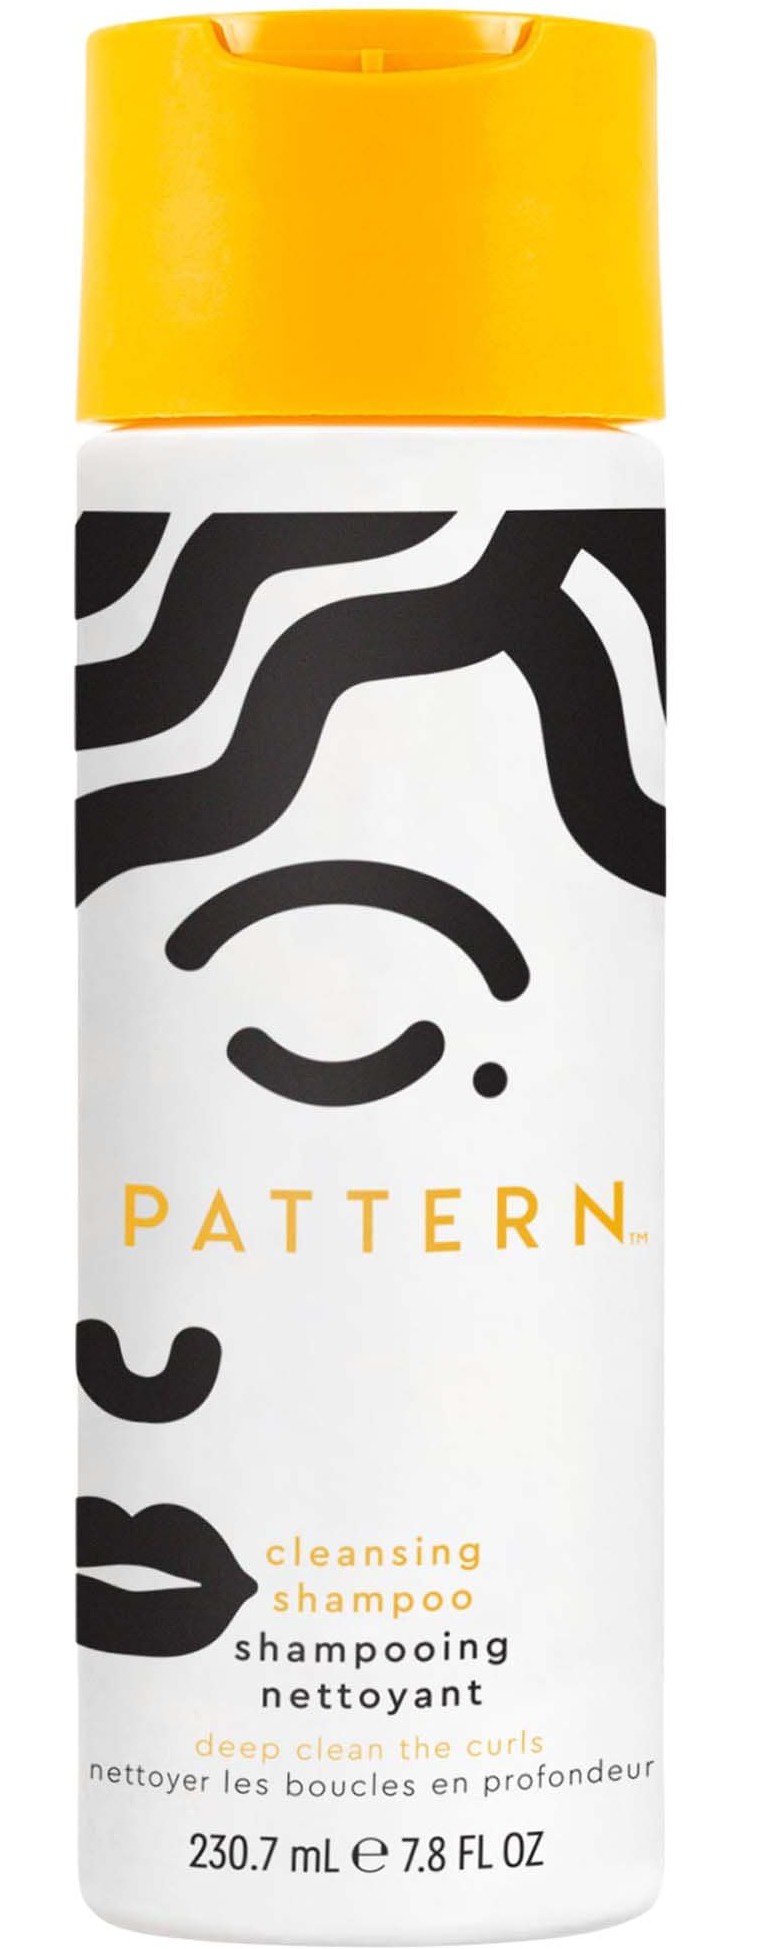 PATTERN Cleansing Shampoo